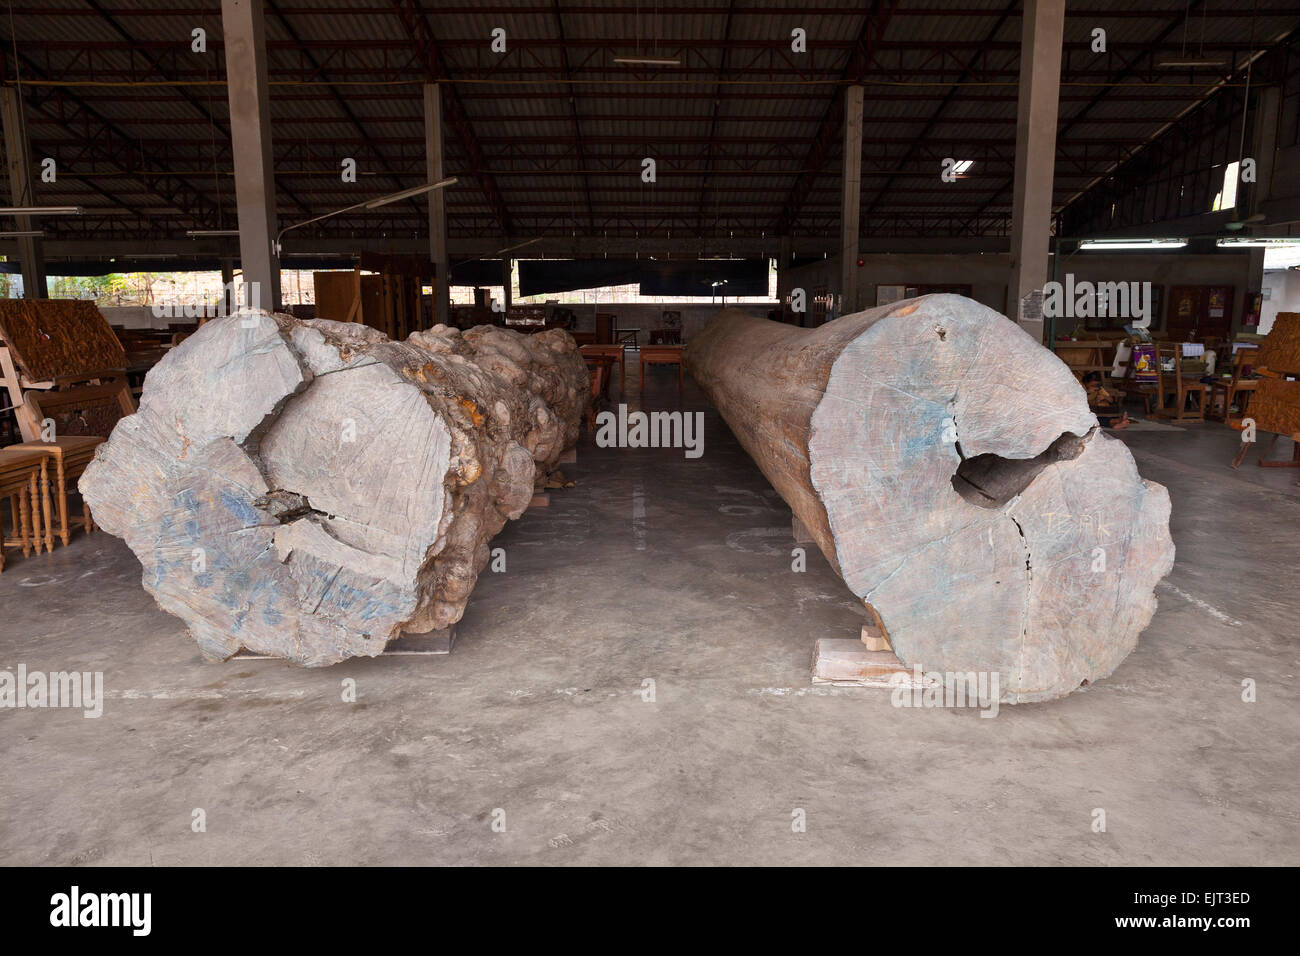 Rosewood (left) and teak (right) logs waiting to be cut and processed at a fine furniture workshop, Chiang Mai, Thailand. Stock Photo